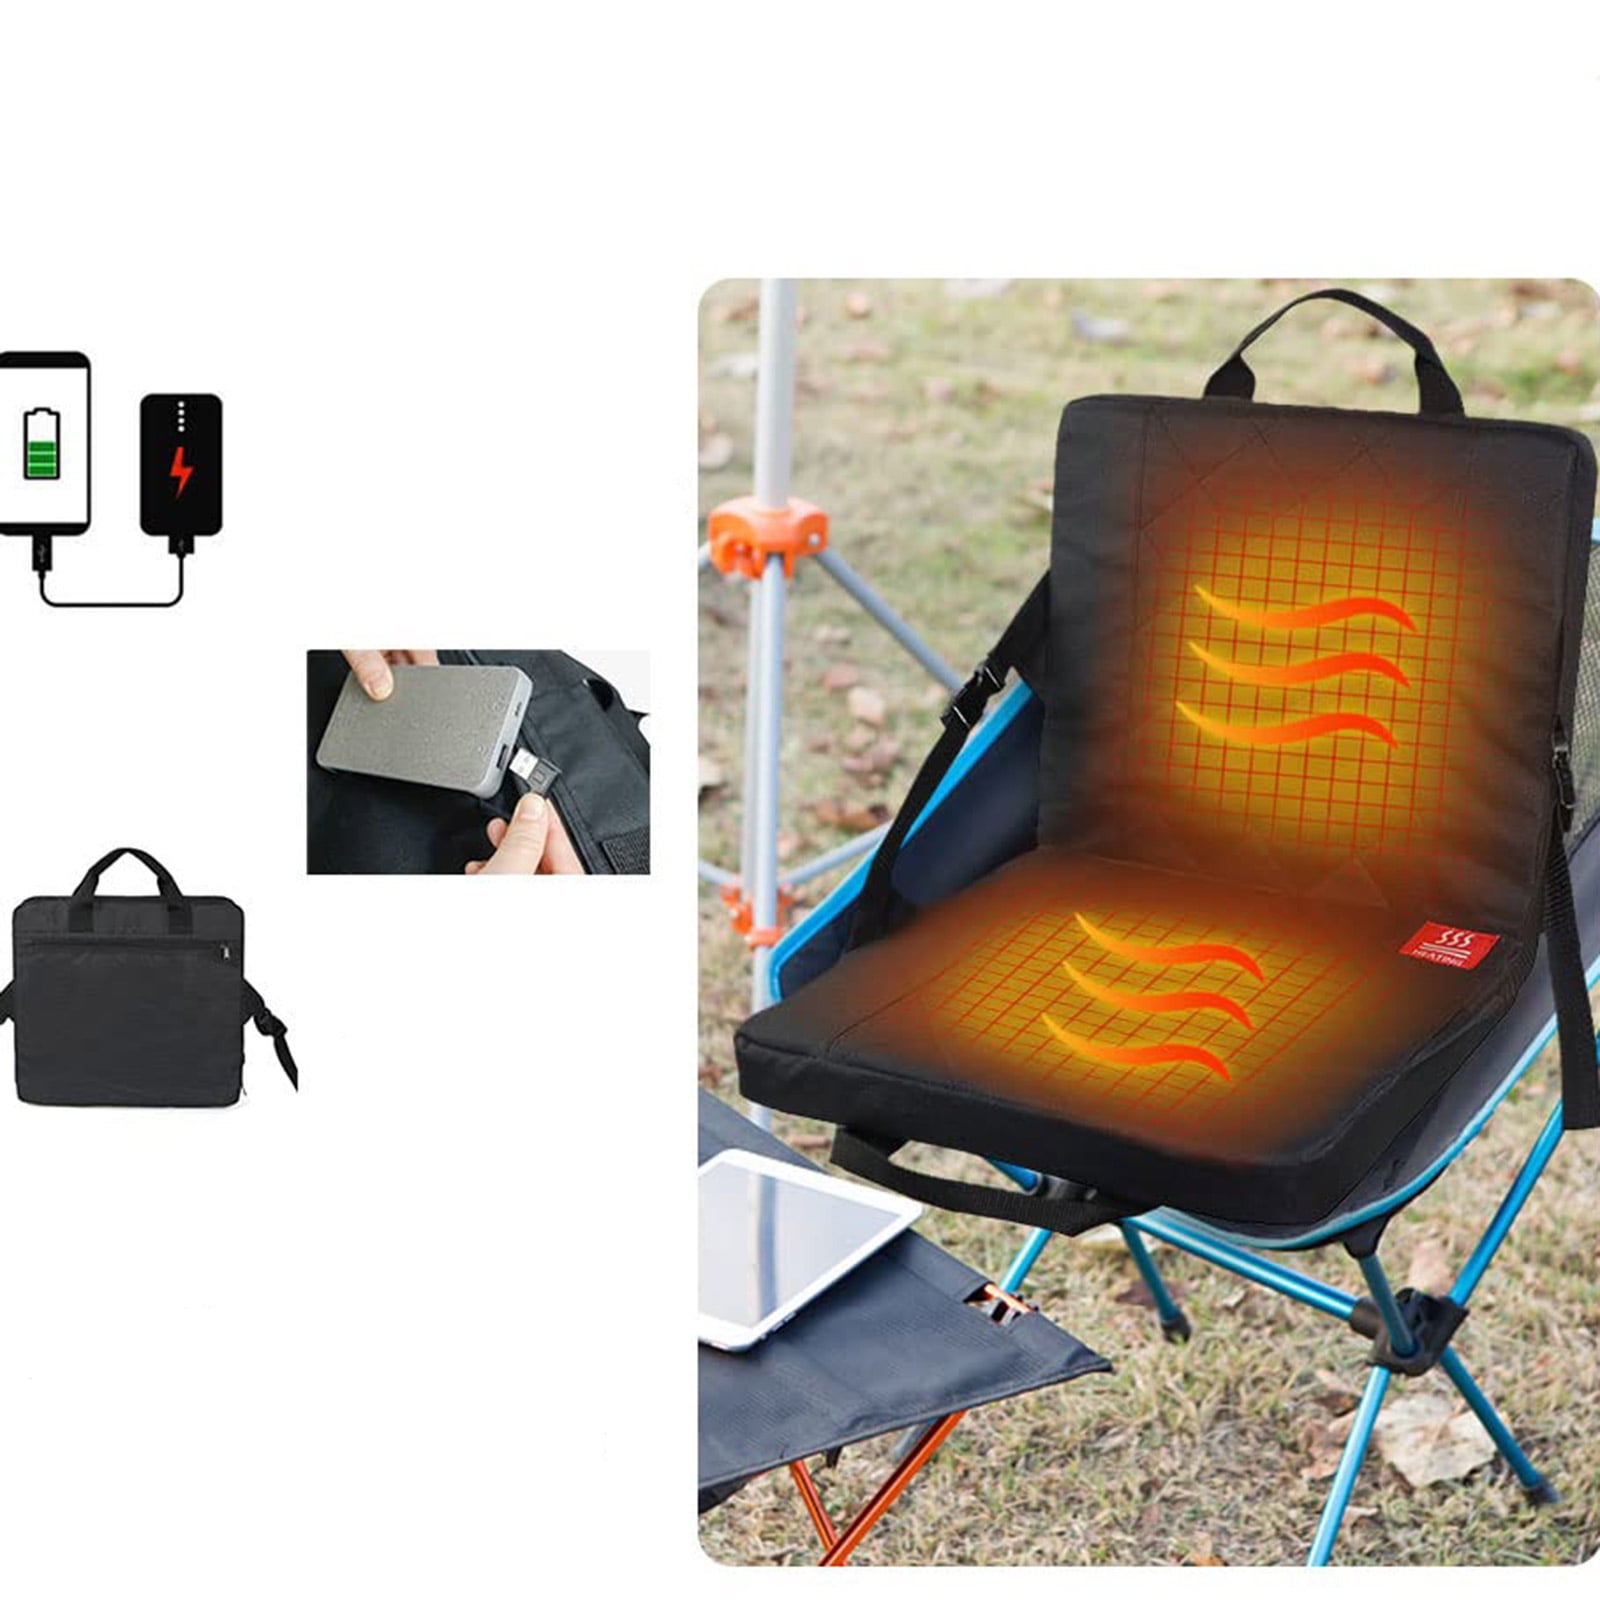 Outdoor Camping Folding Seat Pad Portable Heat Insulation Pad Bus